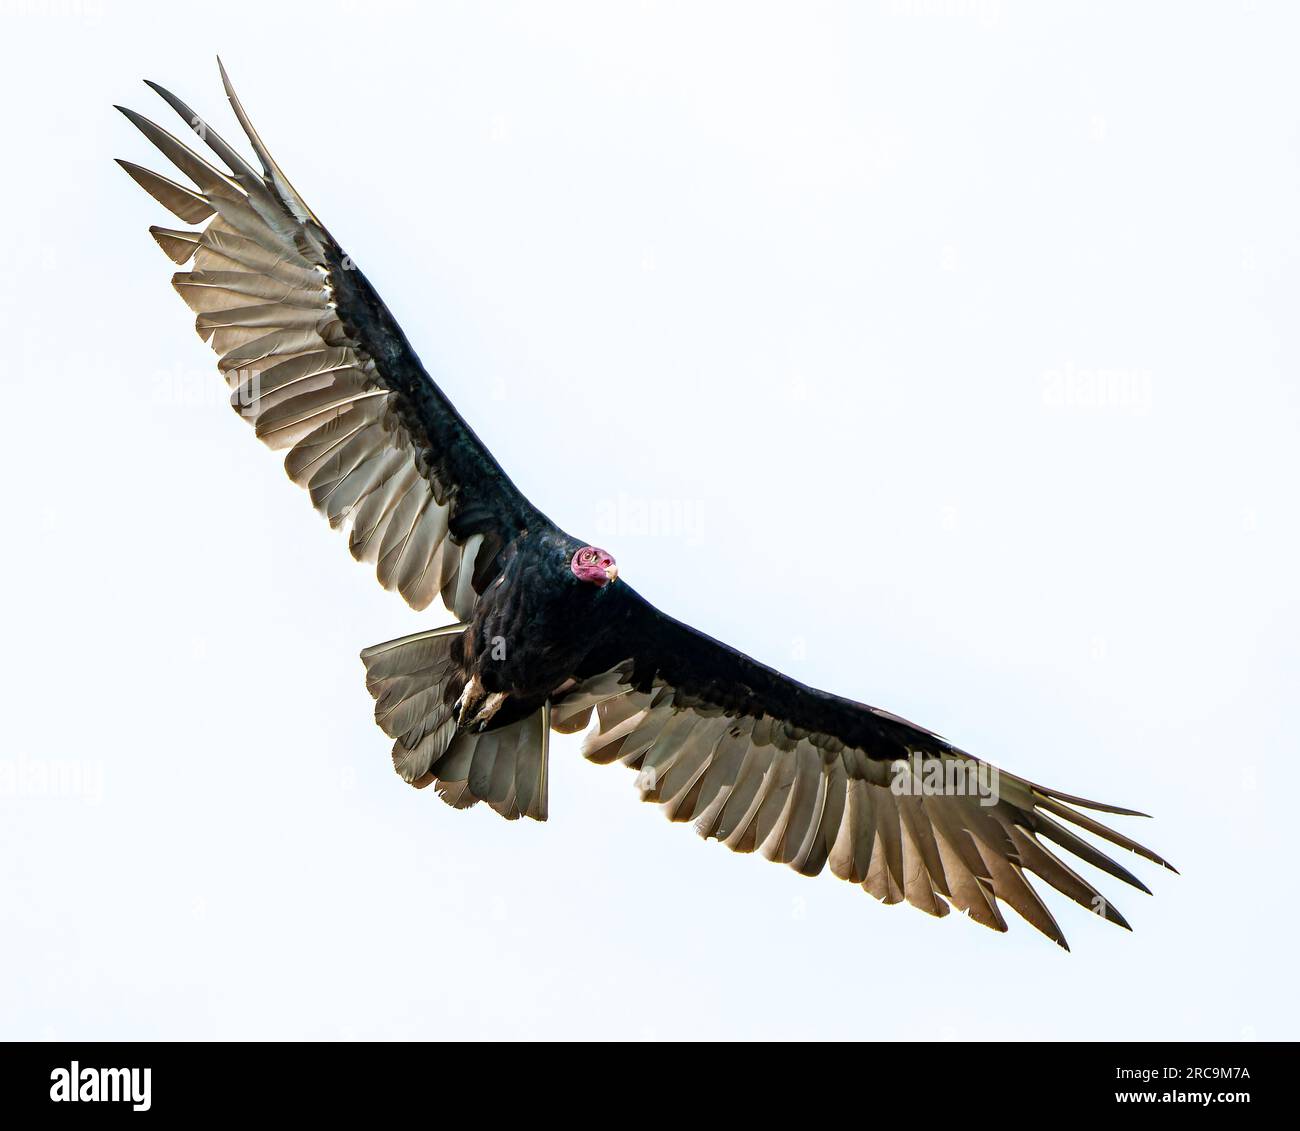 Turkey vulture (Cathartes aura) soaring with full wingspan isolated on white with copy space Stock Photo